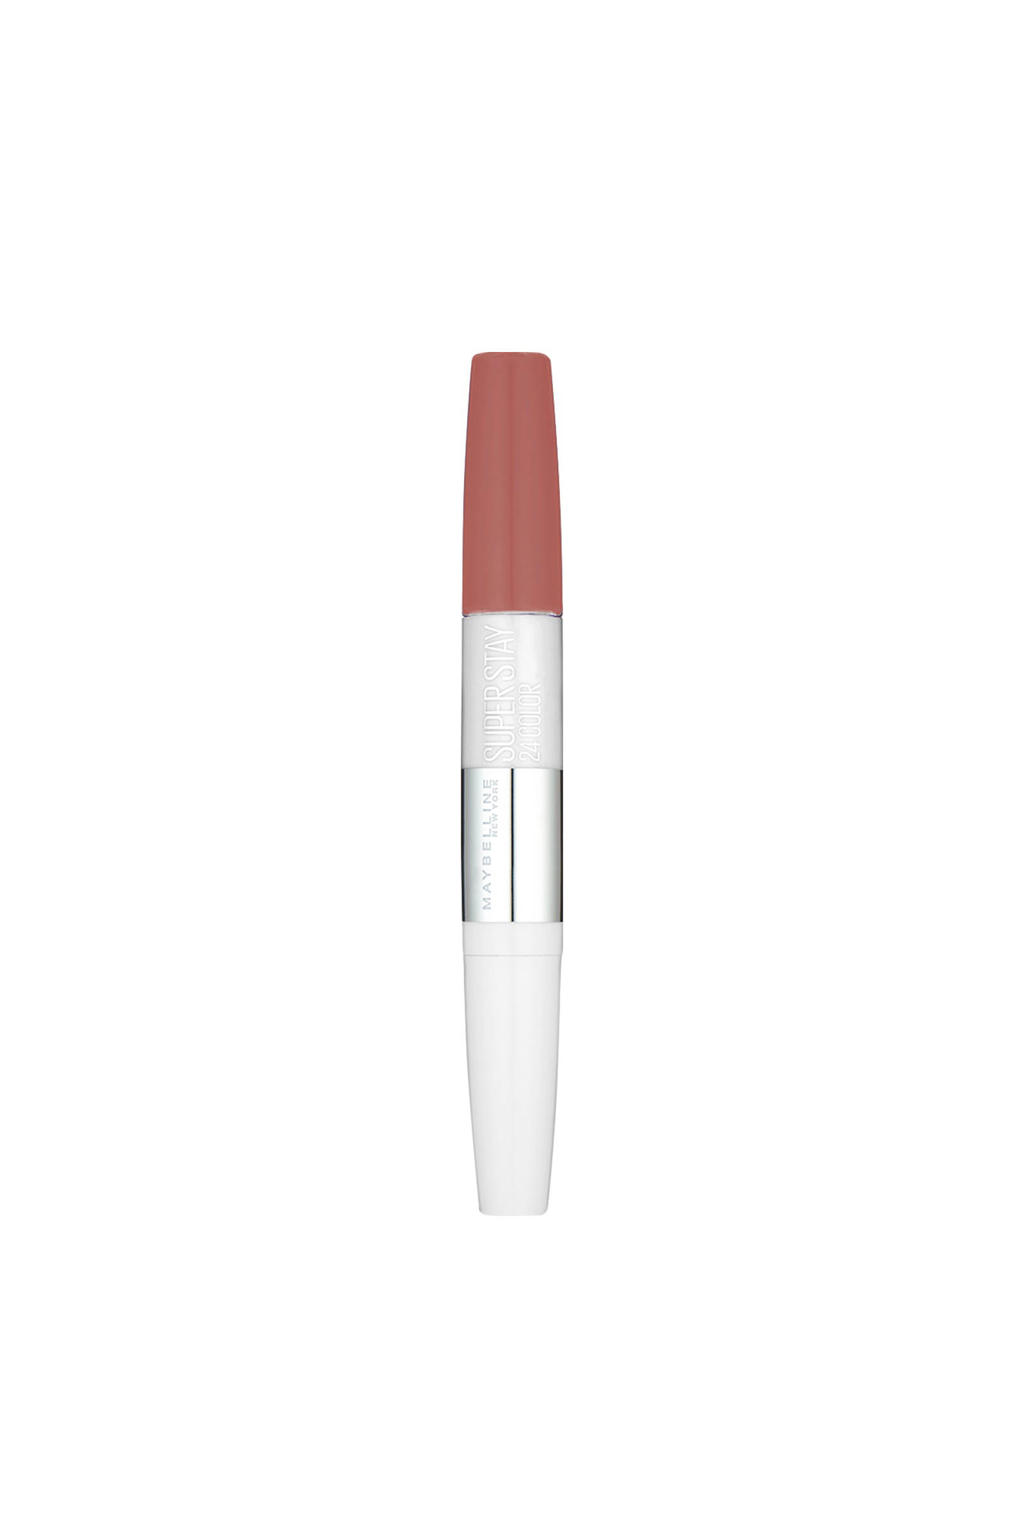 Maybelline New York SuperStay 24HRS lippenstift - 640 Nude Pink